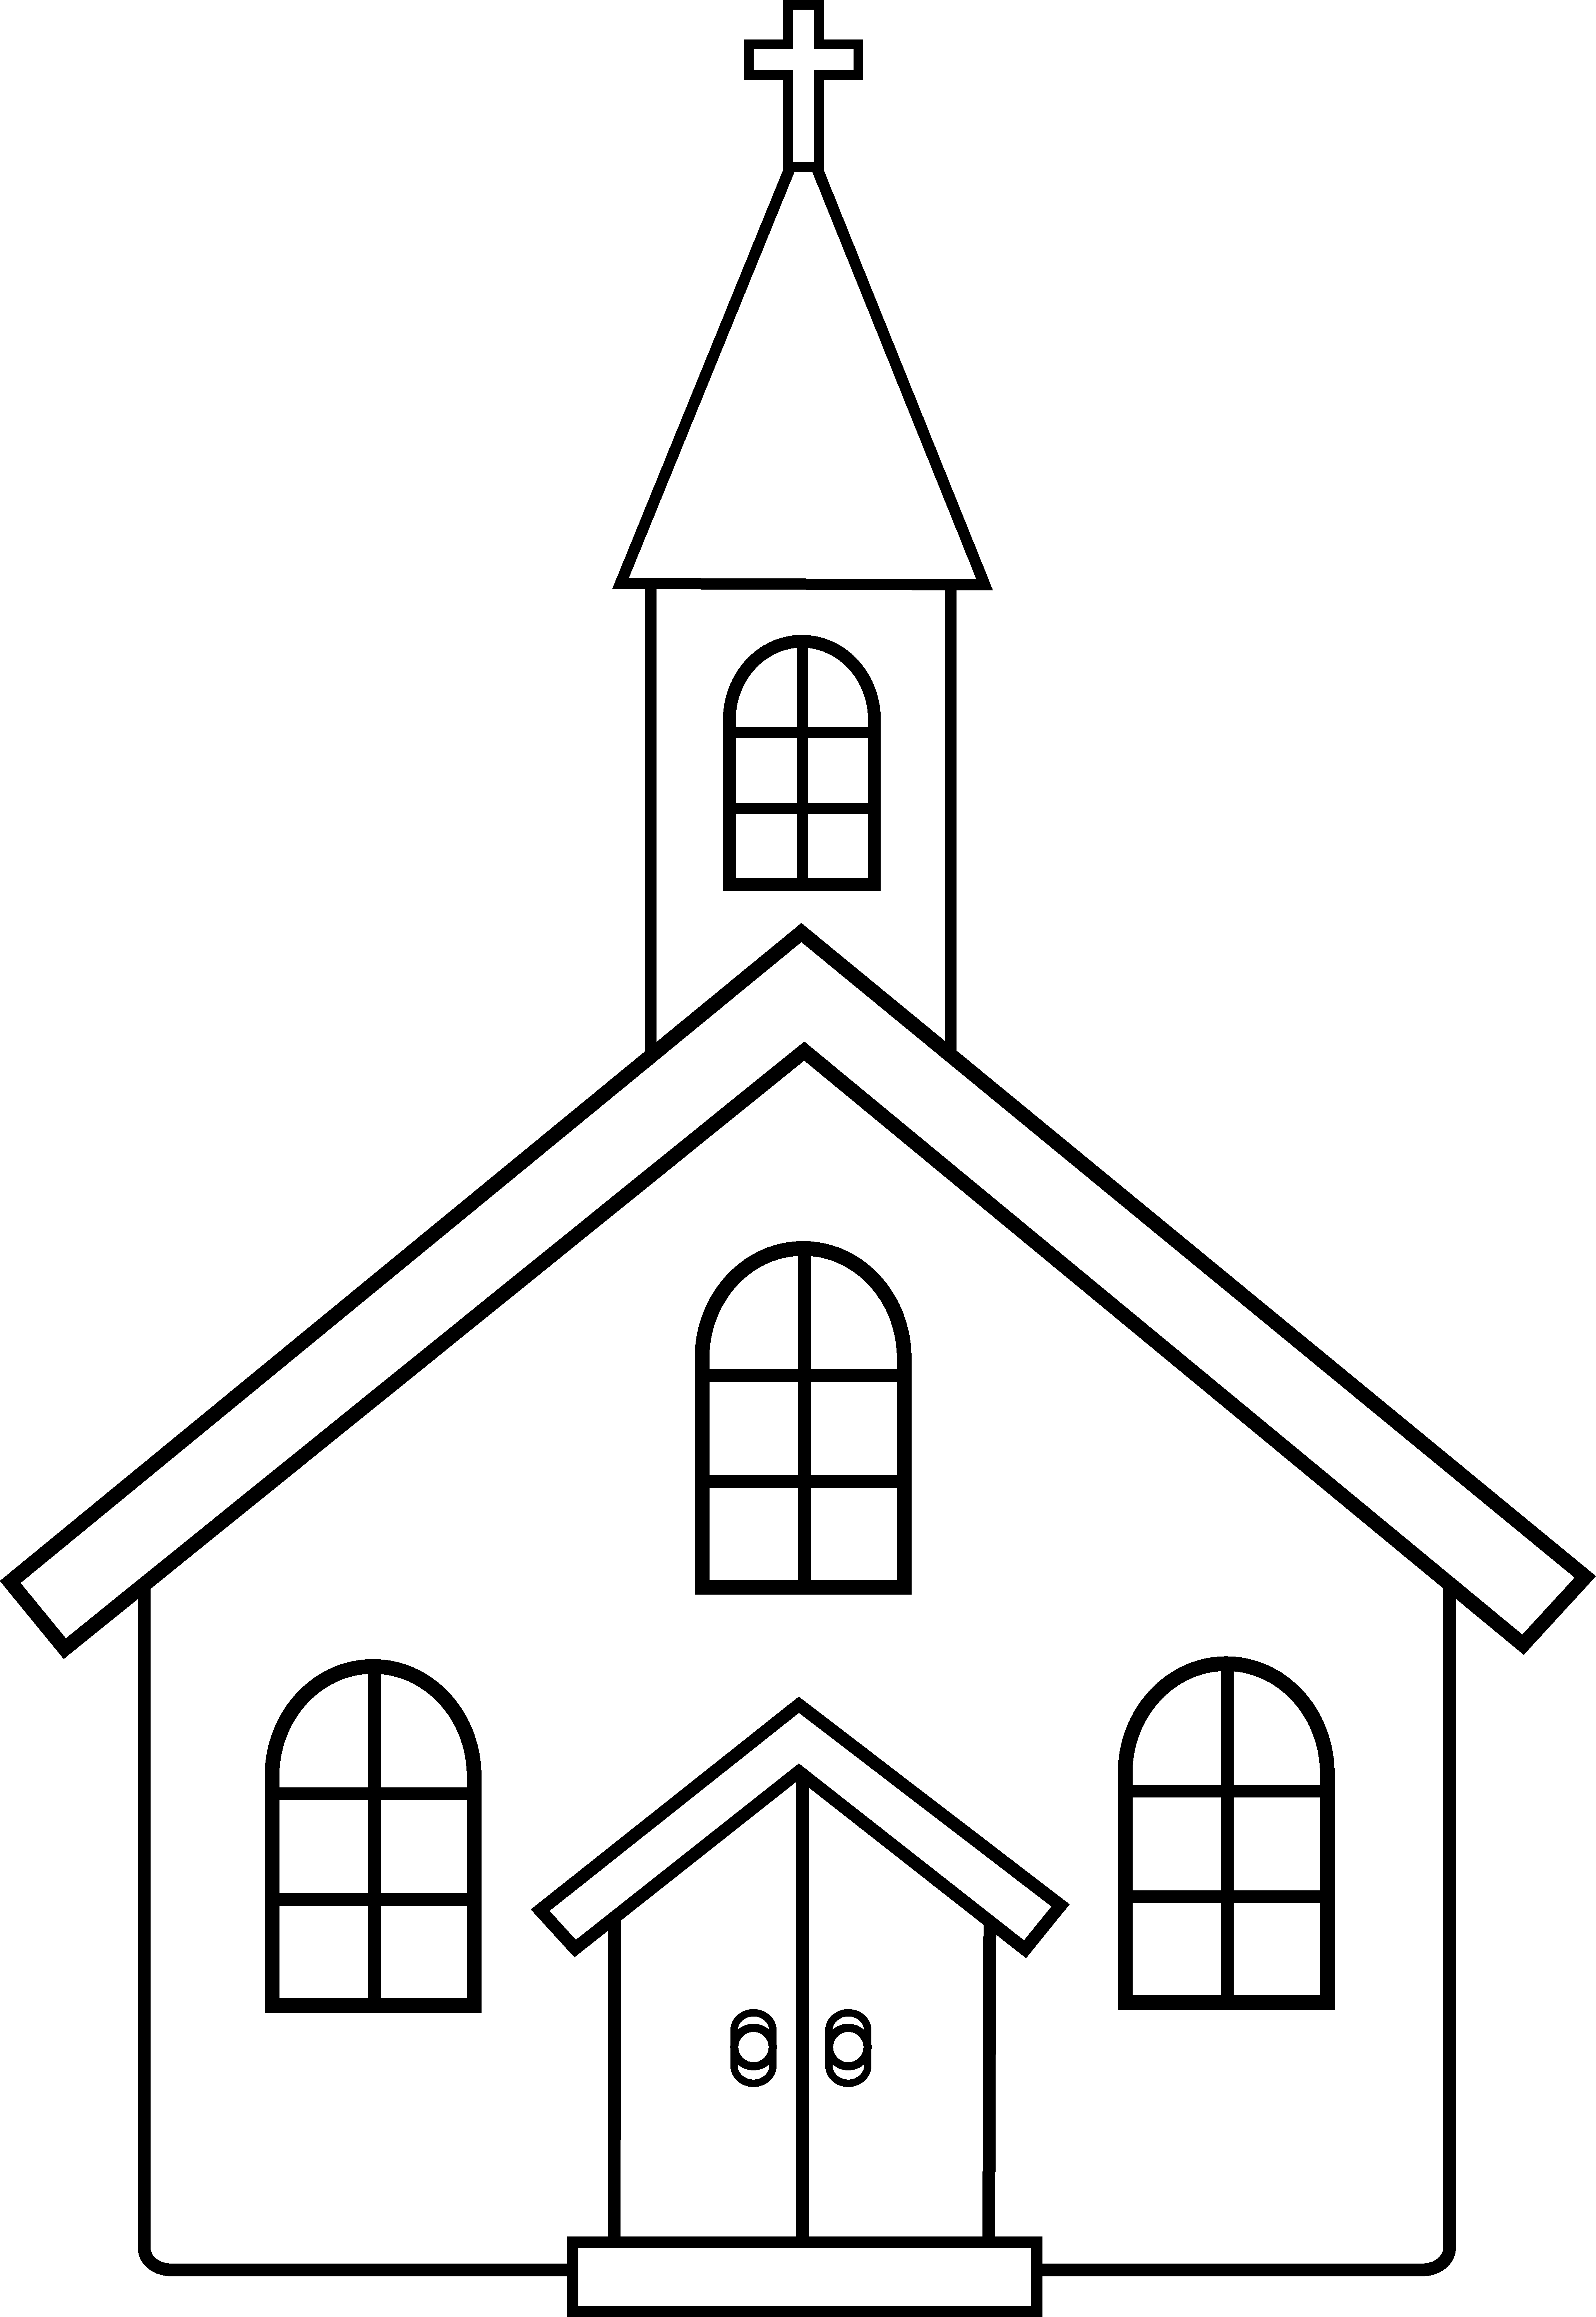 Persona 5 style icon of a church. minimalist color scheme of black and  white on Craiyon